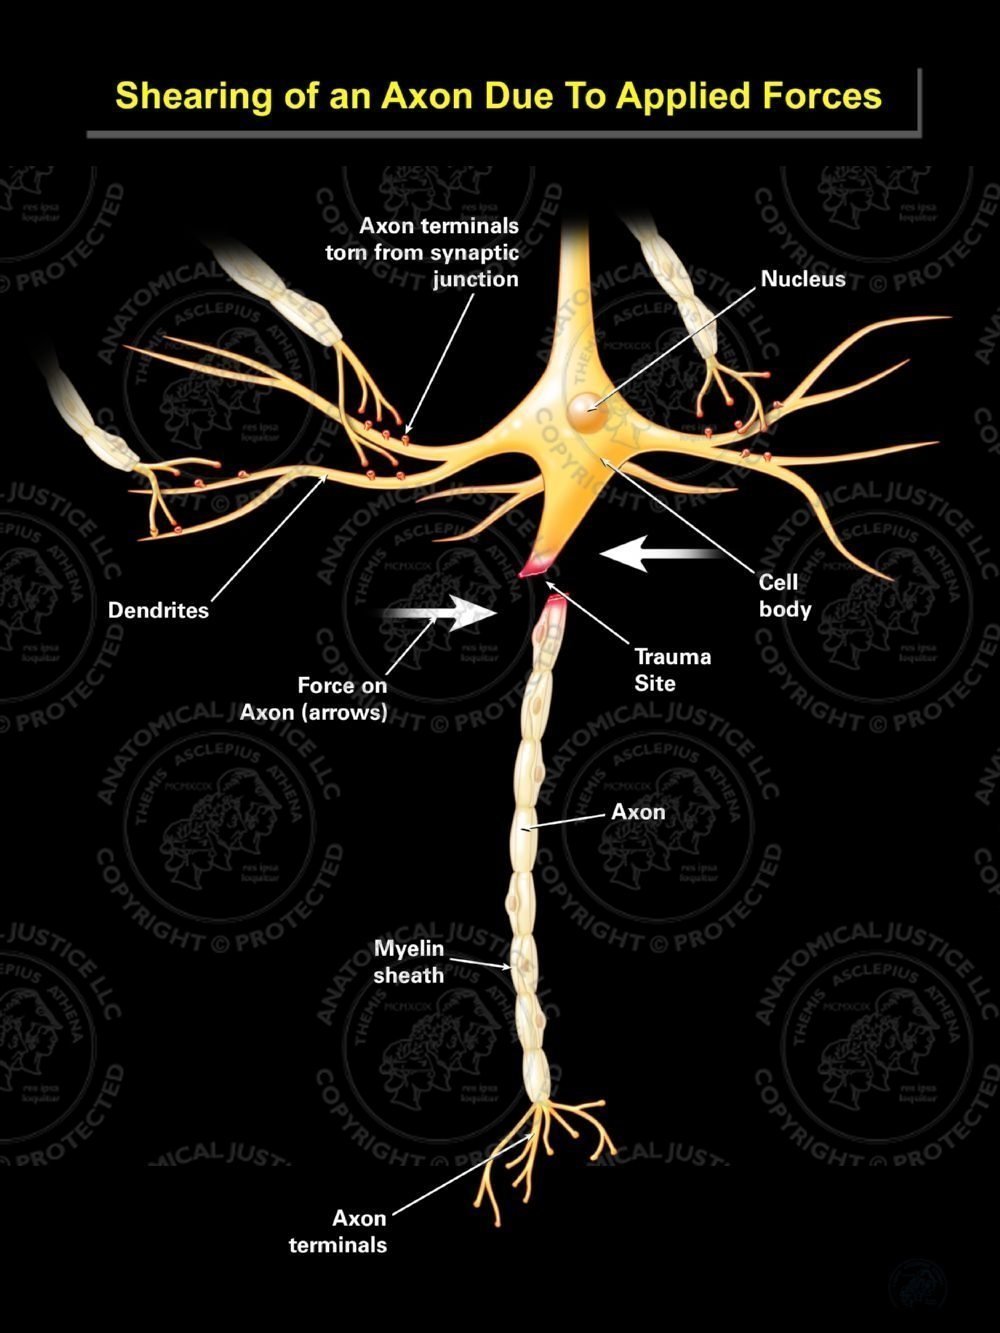 Shearing of an Axon Due To Applied Forces – Black